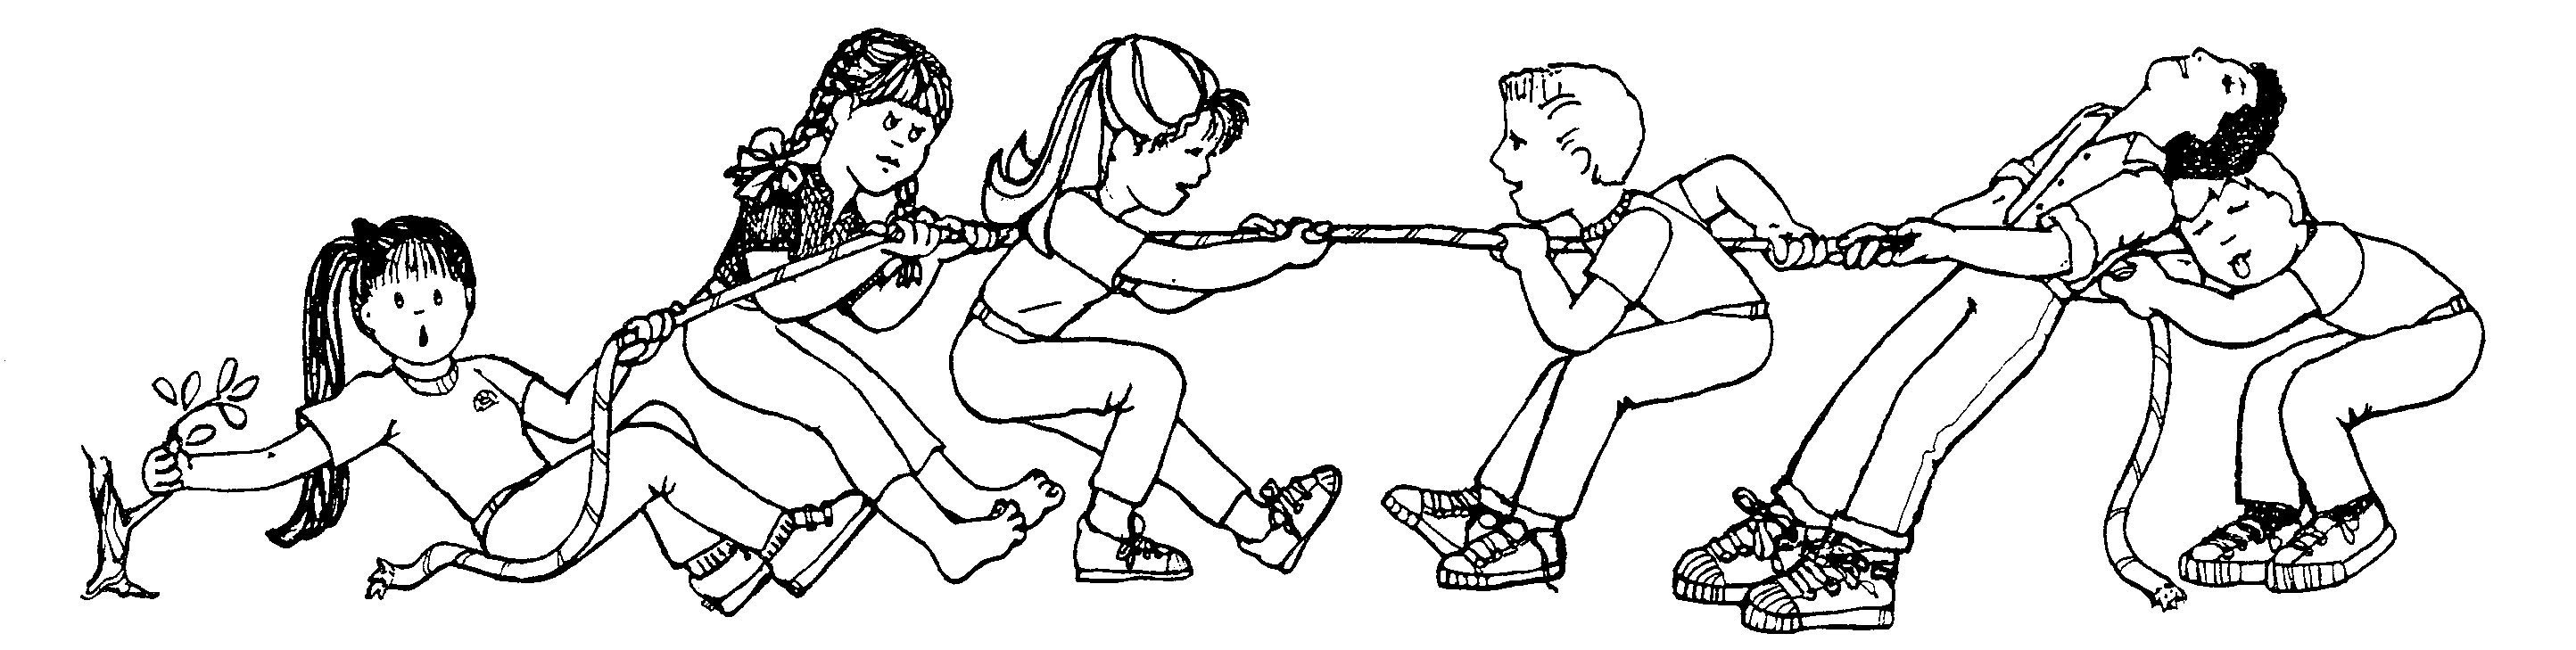 clipart tug of war rope - photo #31